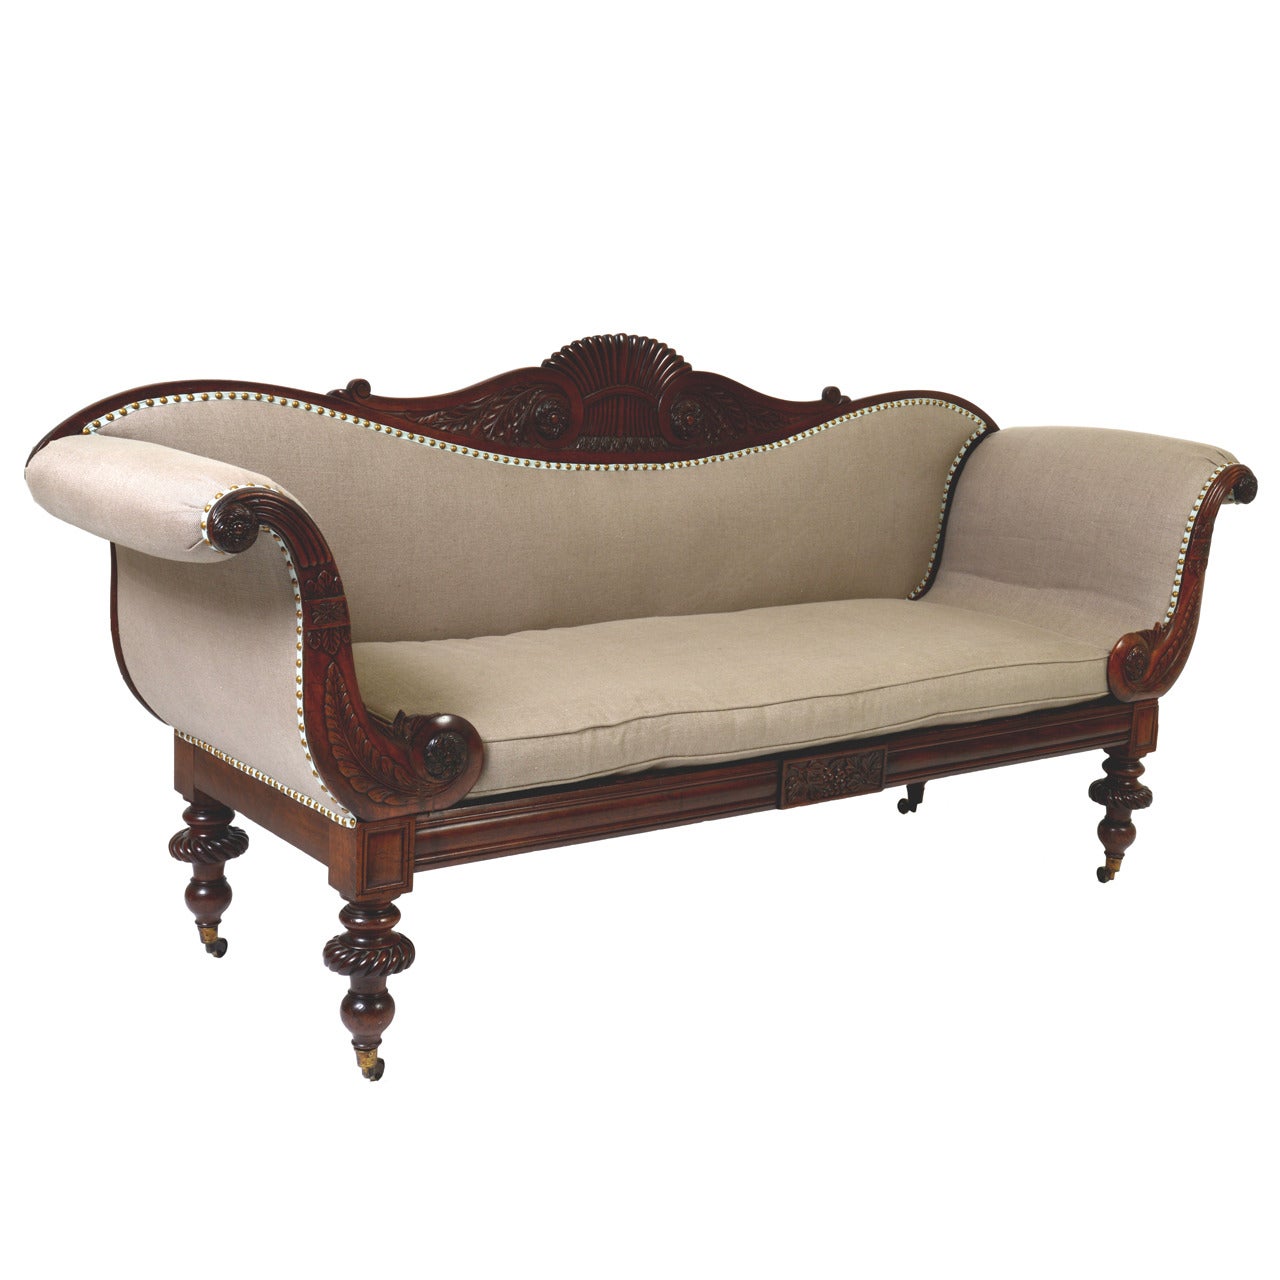 This beautiful mahogany sofa is carved with a typical center back “Jamaican finial” of a sheath of wheat. The arms are carved with curving tropical leaves and rosettes. The graceful sofa seems to float on its bulbous turned feet and original brass